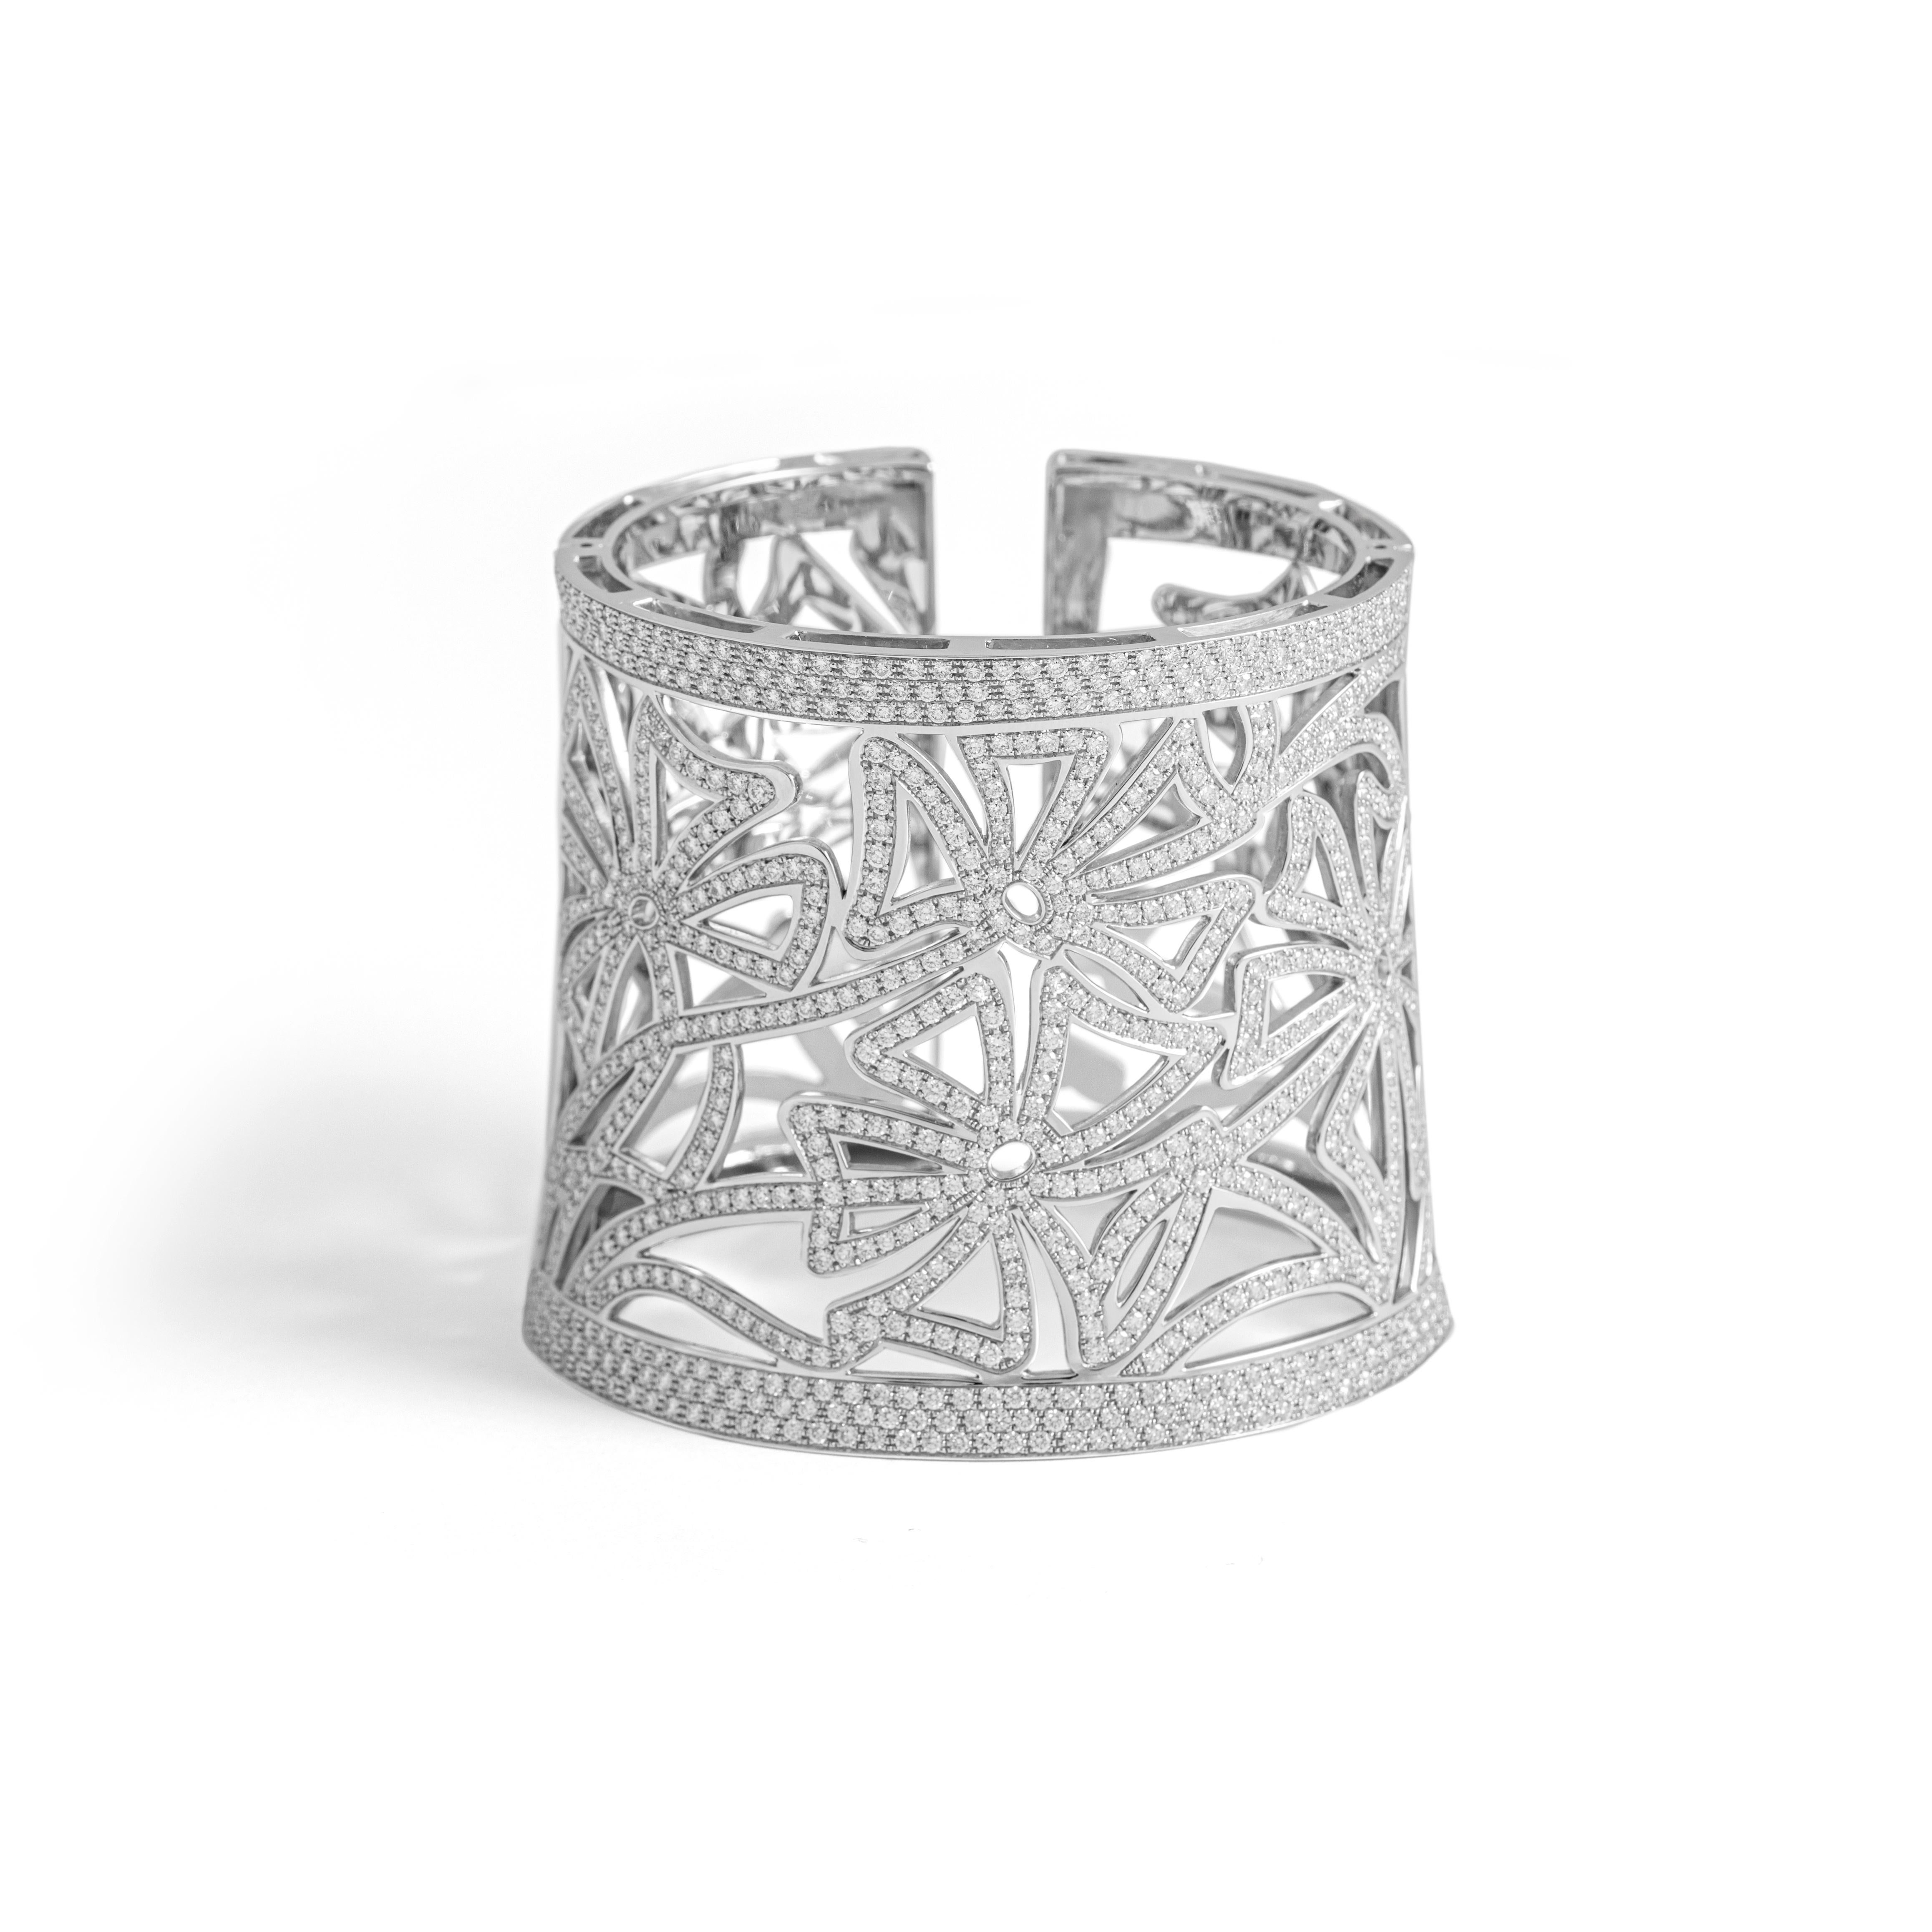 Rigid cuff bracelet in 18kt white gold set with 836 diamonds 11.60 cts

Inner circumference:
Small side approximately 15.70 centimeters ( 6.18 inches)  
Large side approximately 17.74 centimeters ( 6.98 inches)  

Total weight: 150.20 grams.
Width